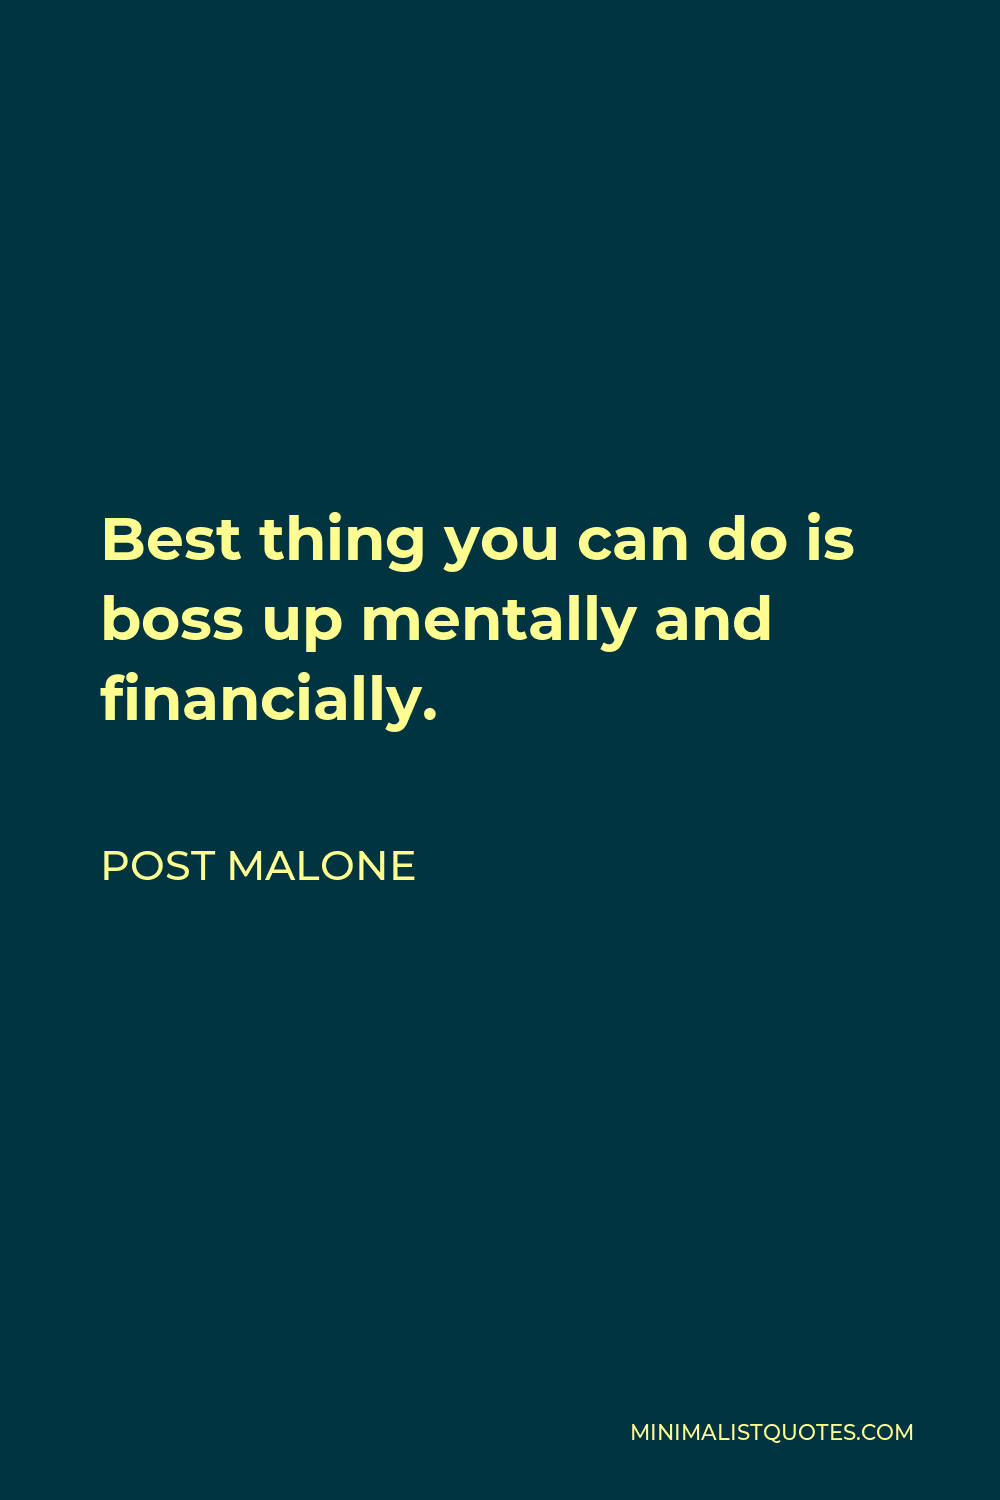 Post Malone Quote - Best thing you can do is boss up mentally and financially.